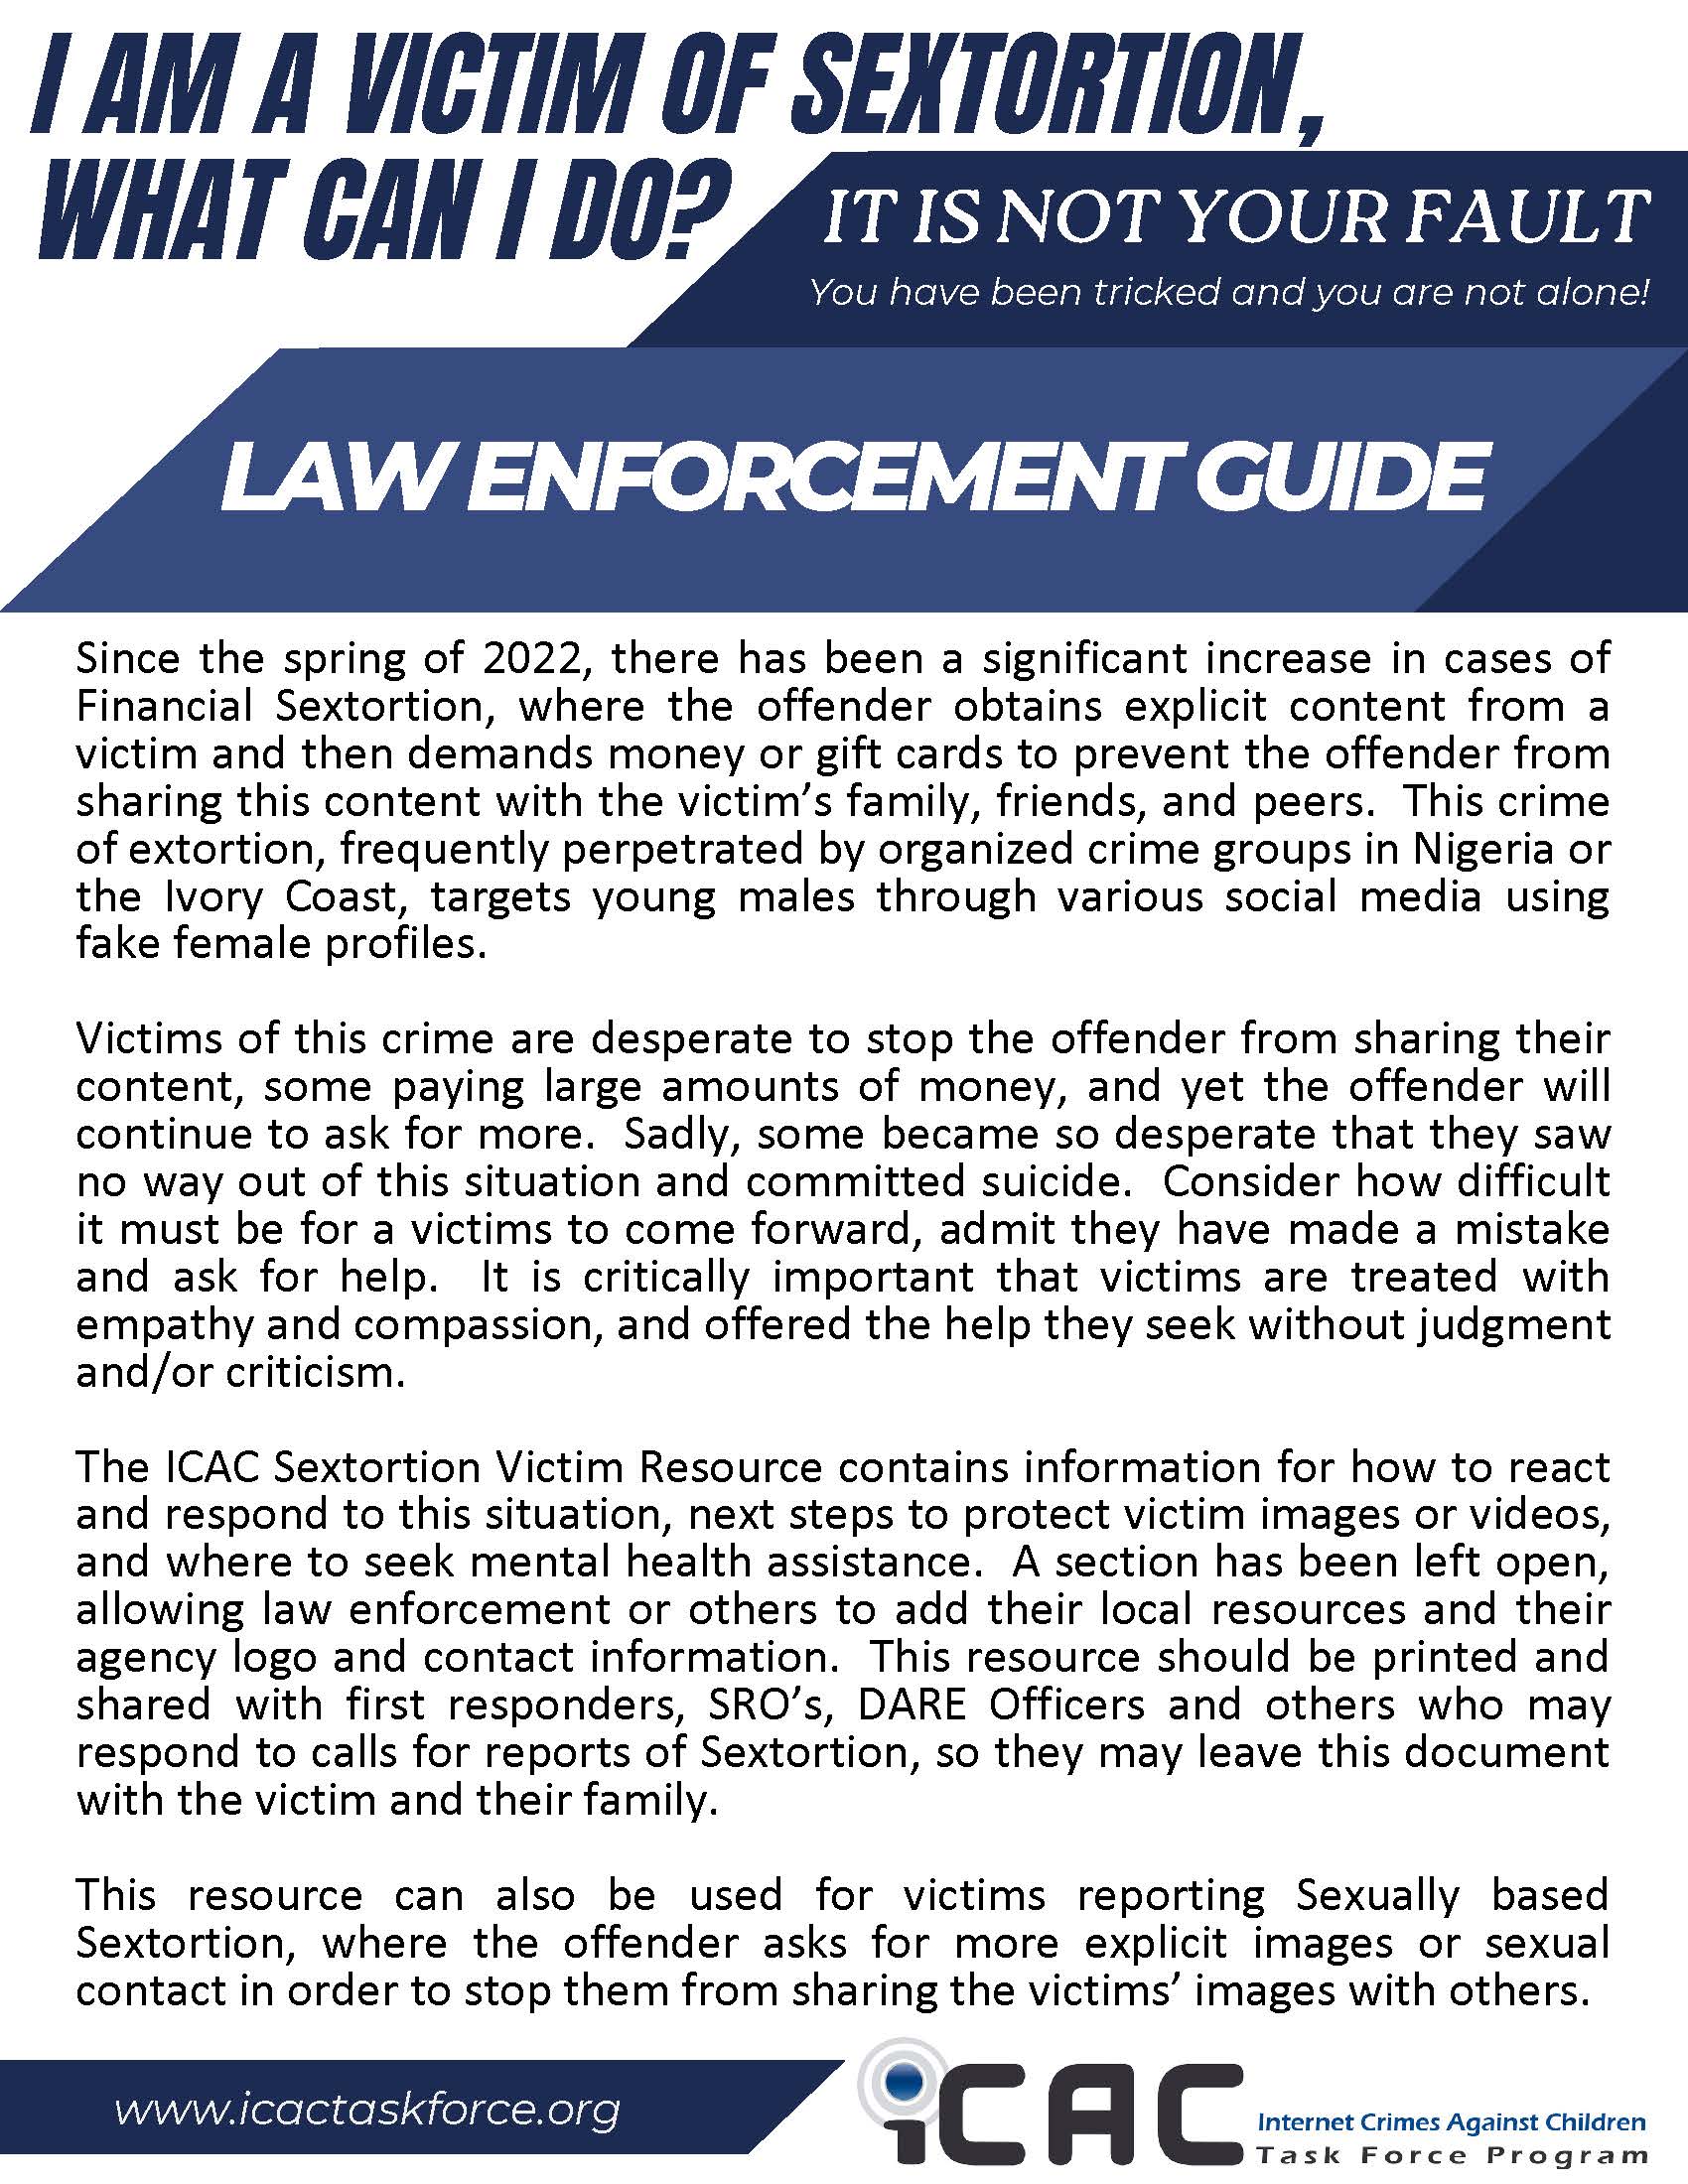 image representing Law Enforcement Guide for Sextortion Victims